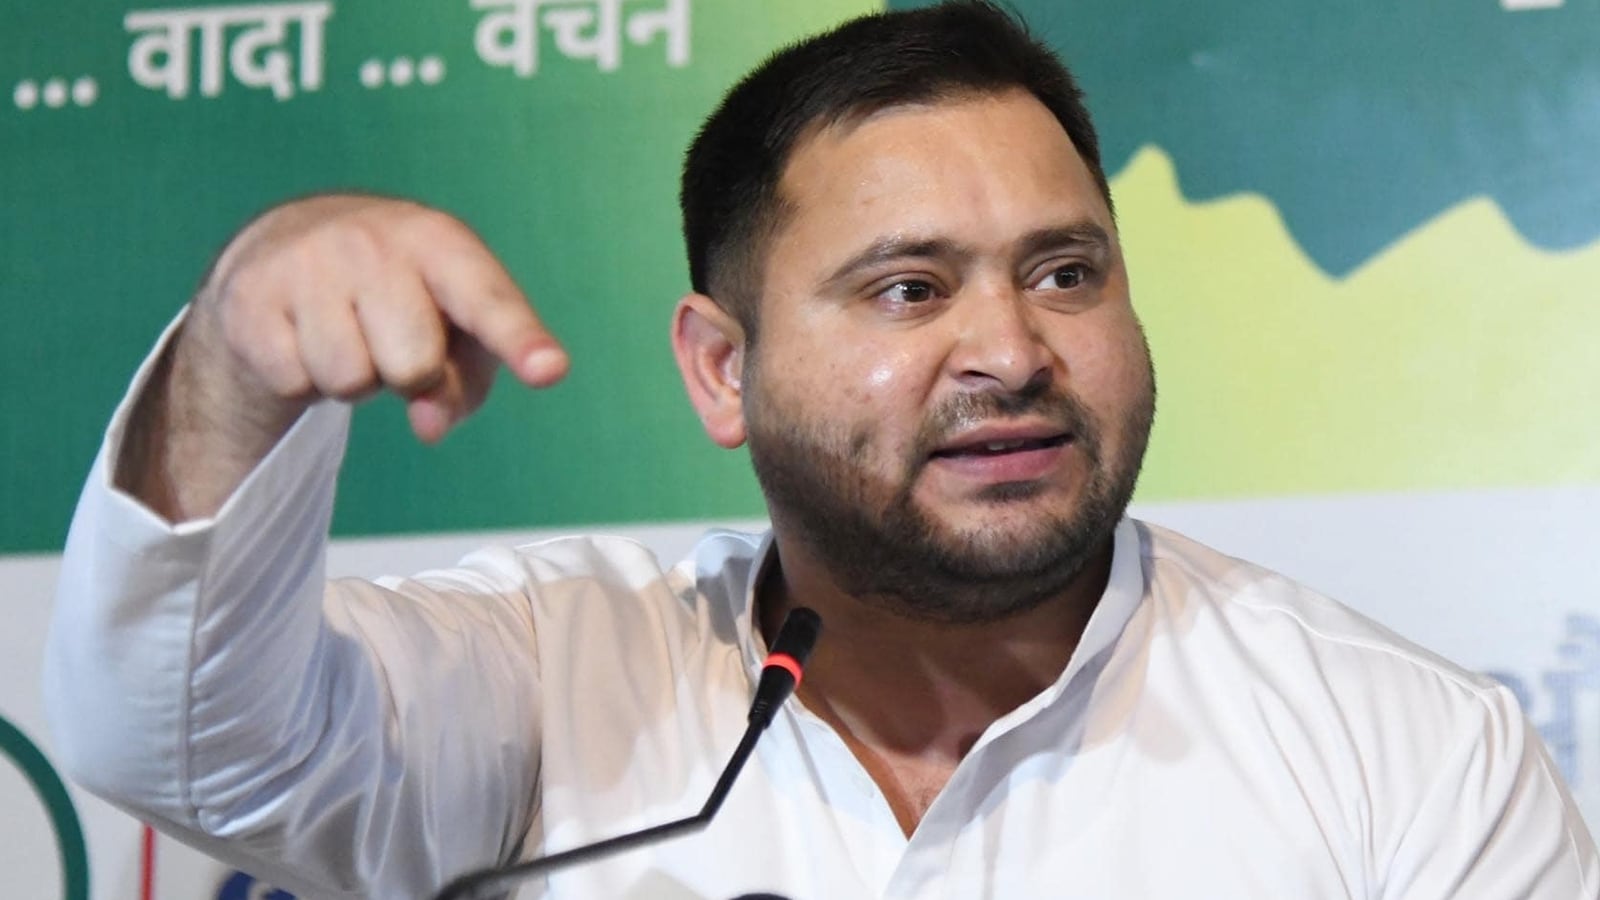 Tejashwi intimidated officers, cancel his bail: CBI to court; notice issued  | Latest News India - Hindustan Times